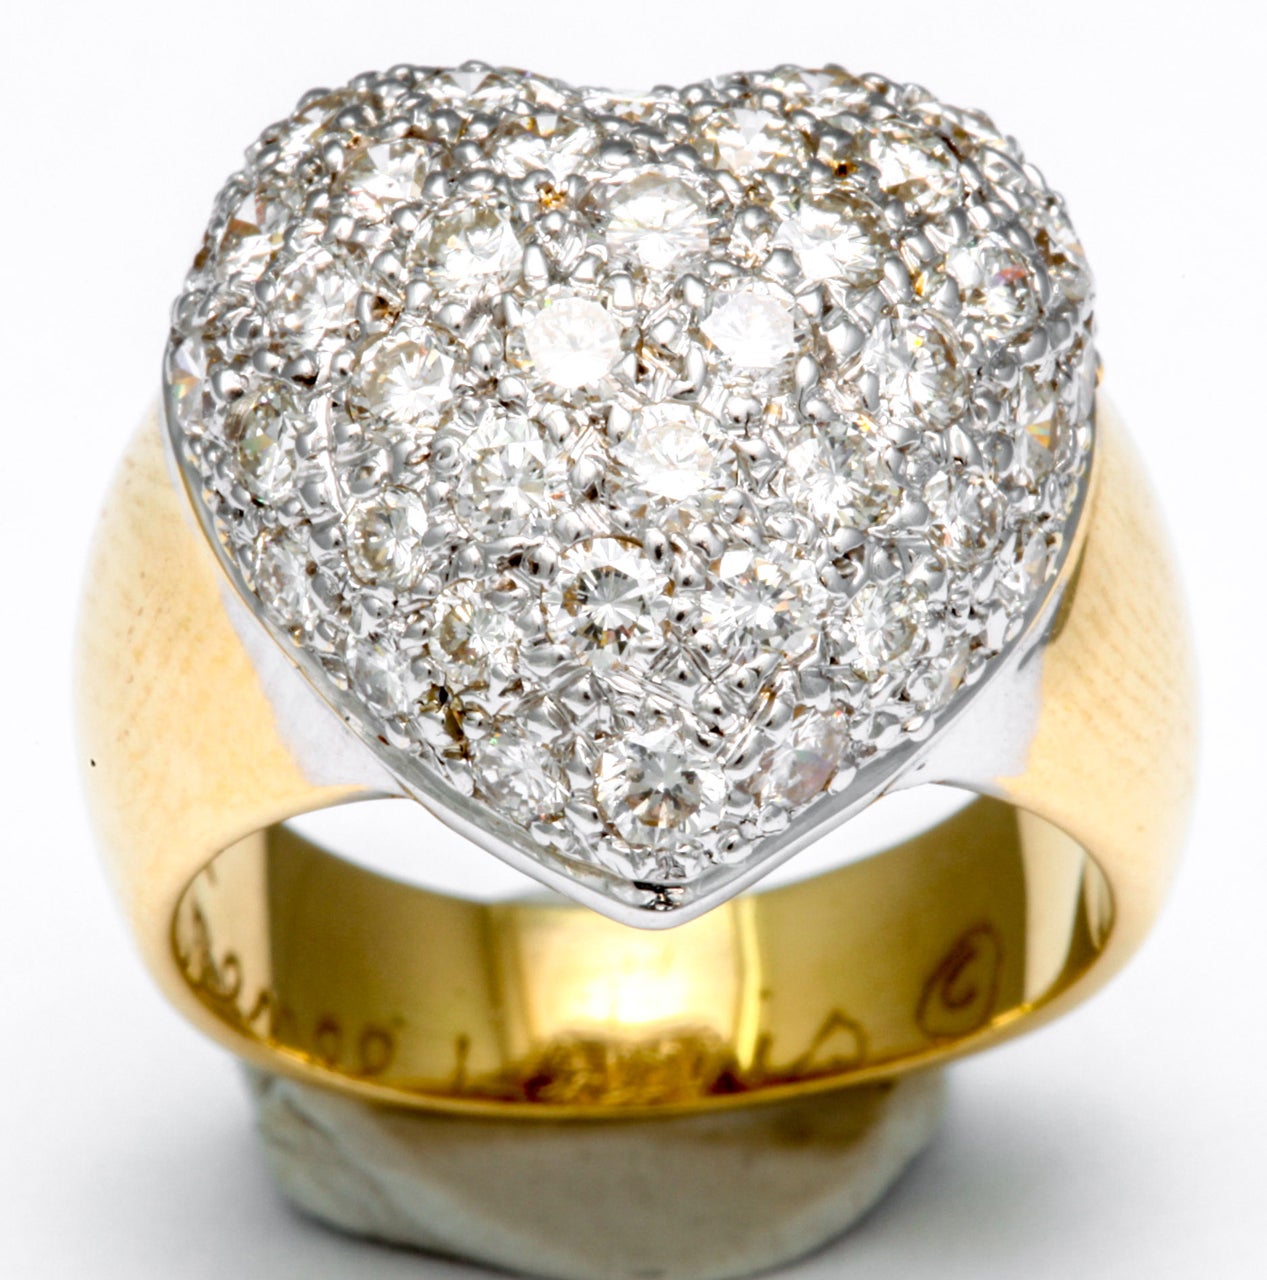 Lovely, heart ring featuring 48 diamonds weighing approximately 2.50 carats, crafted in 18k gold, signed Rene Lewis.